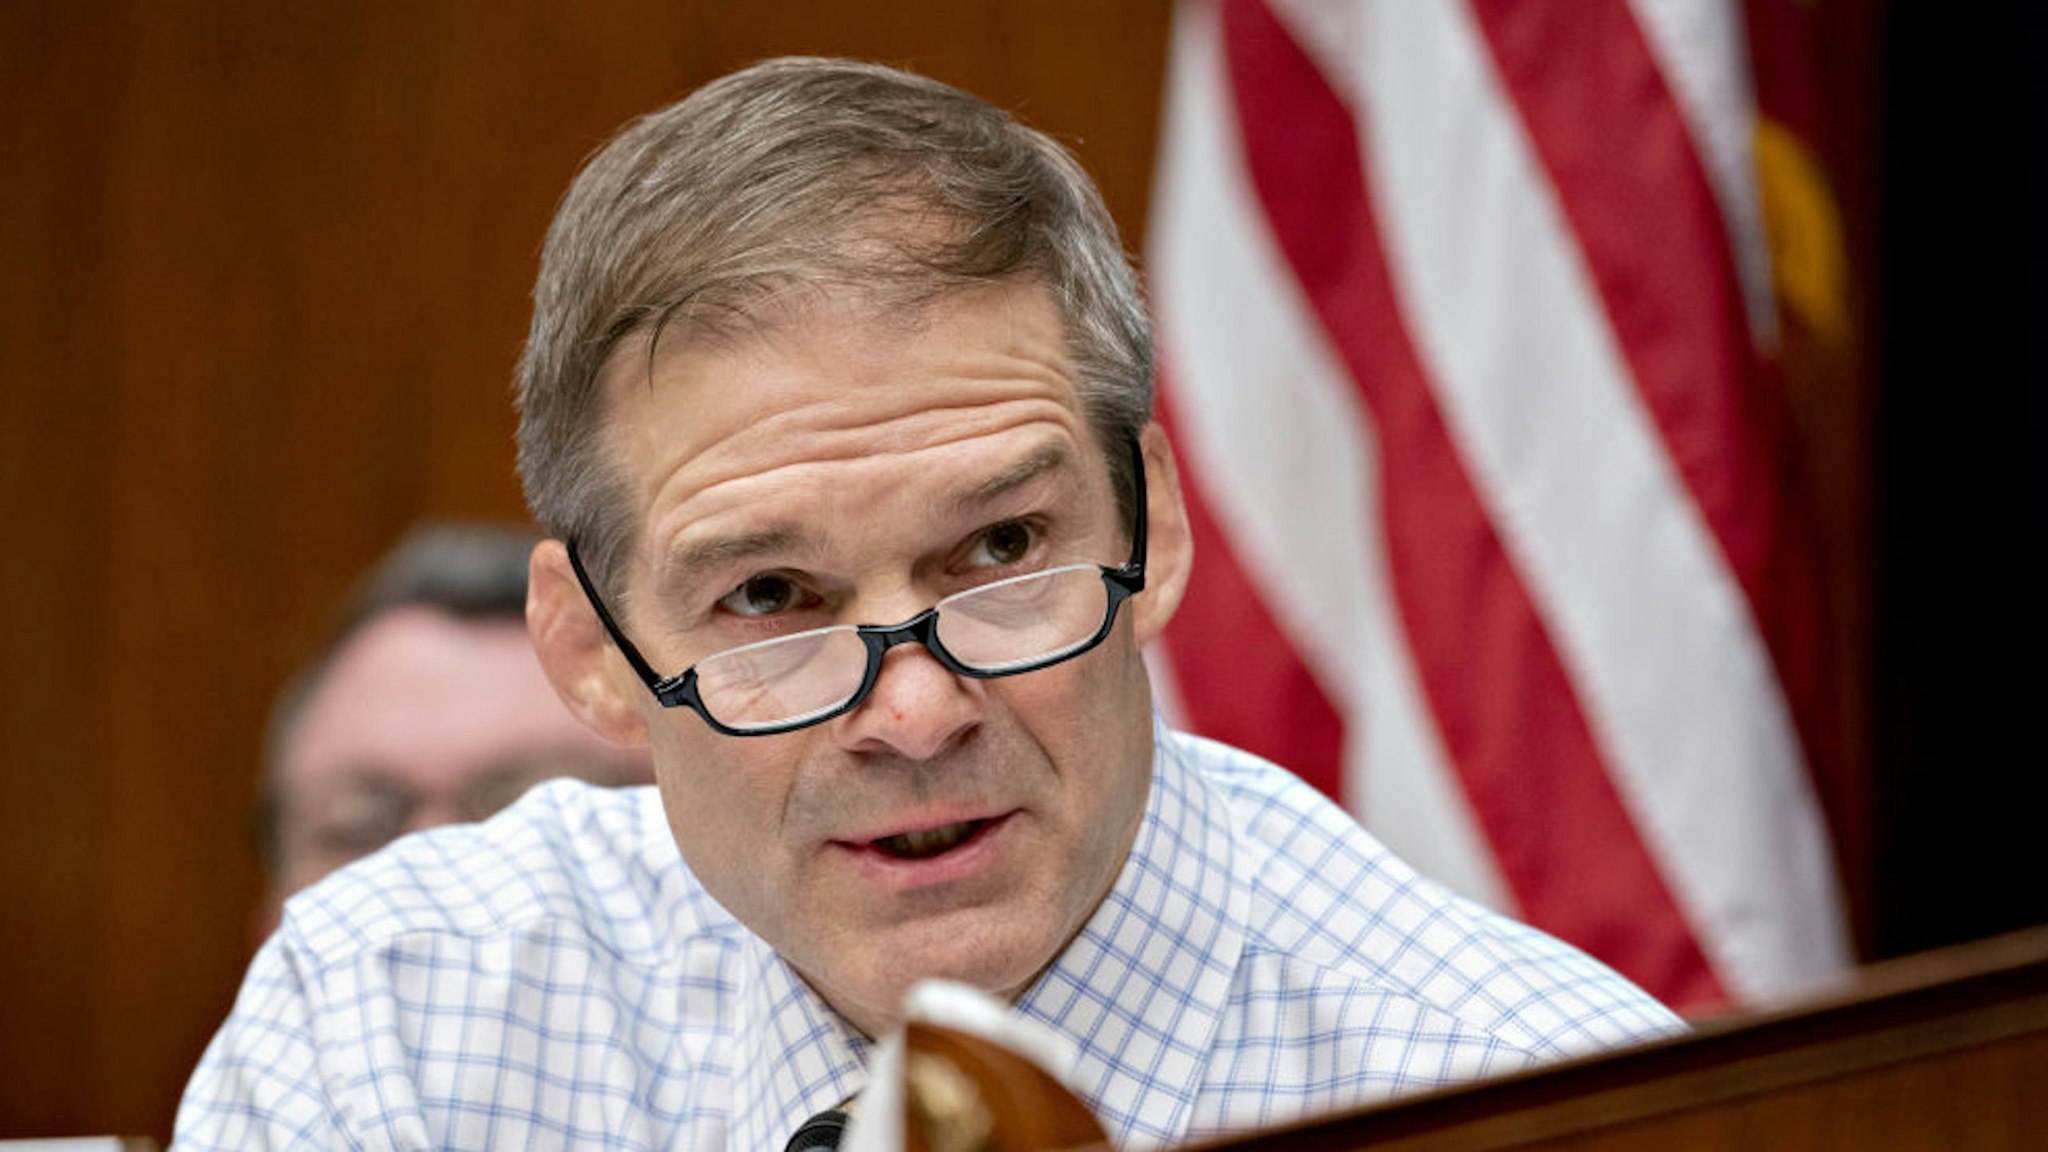 Representative Jim Jordan, a Republican from Ohio and ranking member of the House Oversight Committee, makes an opening statement during a hearing in Washington, D.C., U.S., on Wednesday, March 11, 2020. The U.S. has shifted into a new phase of its coronavirus response after efforts to stamp out sparks of an outbreak have failed. Authorities now are focusing on limiting damage.